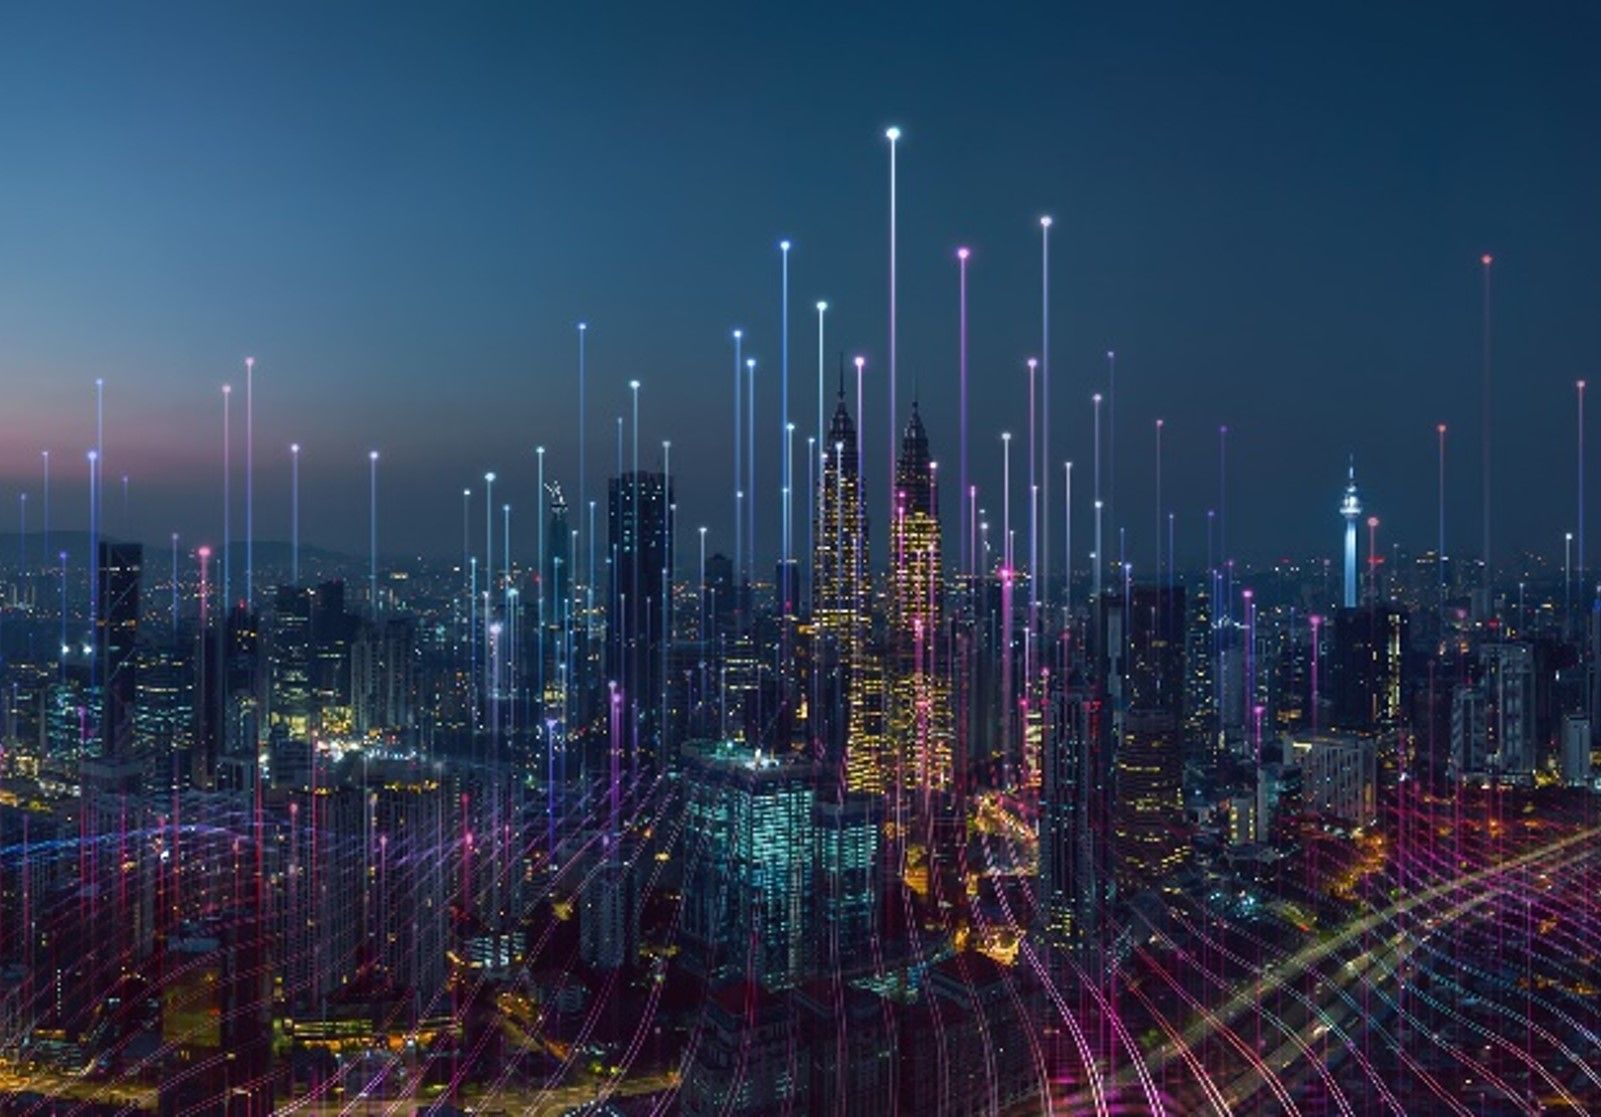 Is an illustration of a city with many lights - Technology